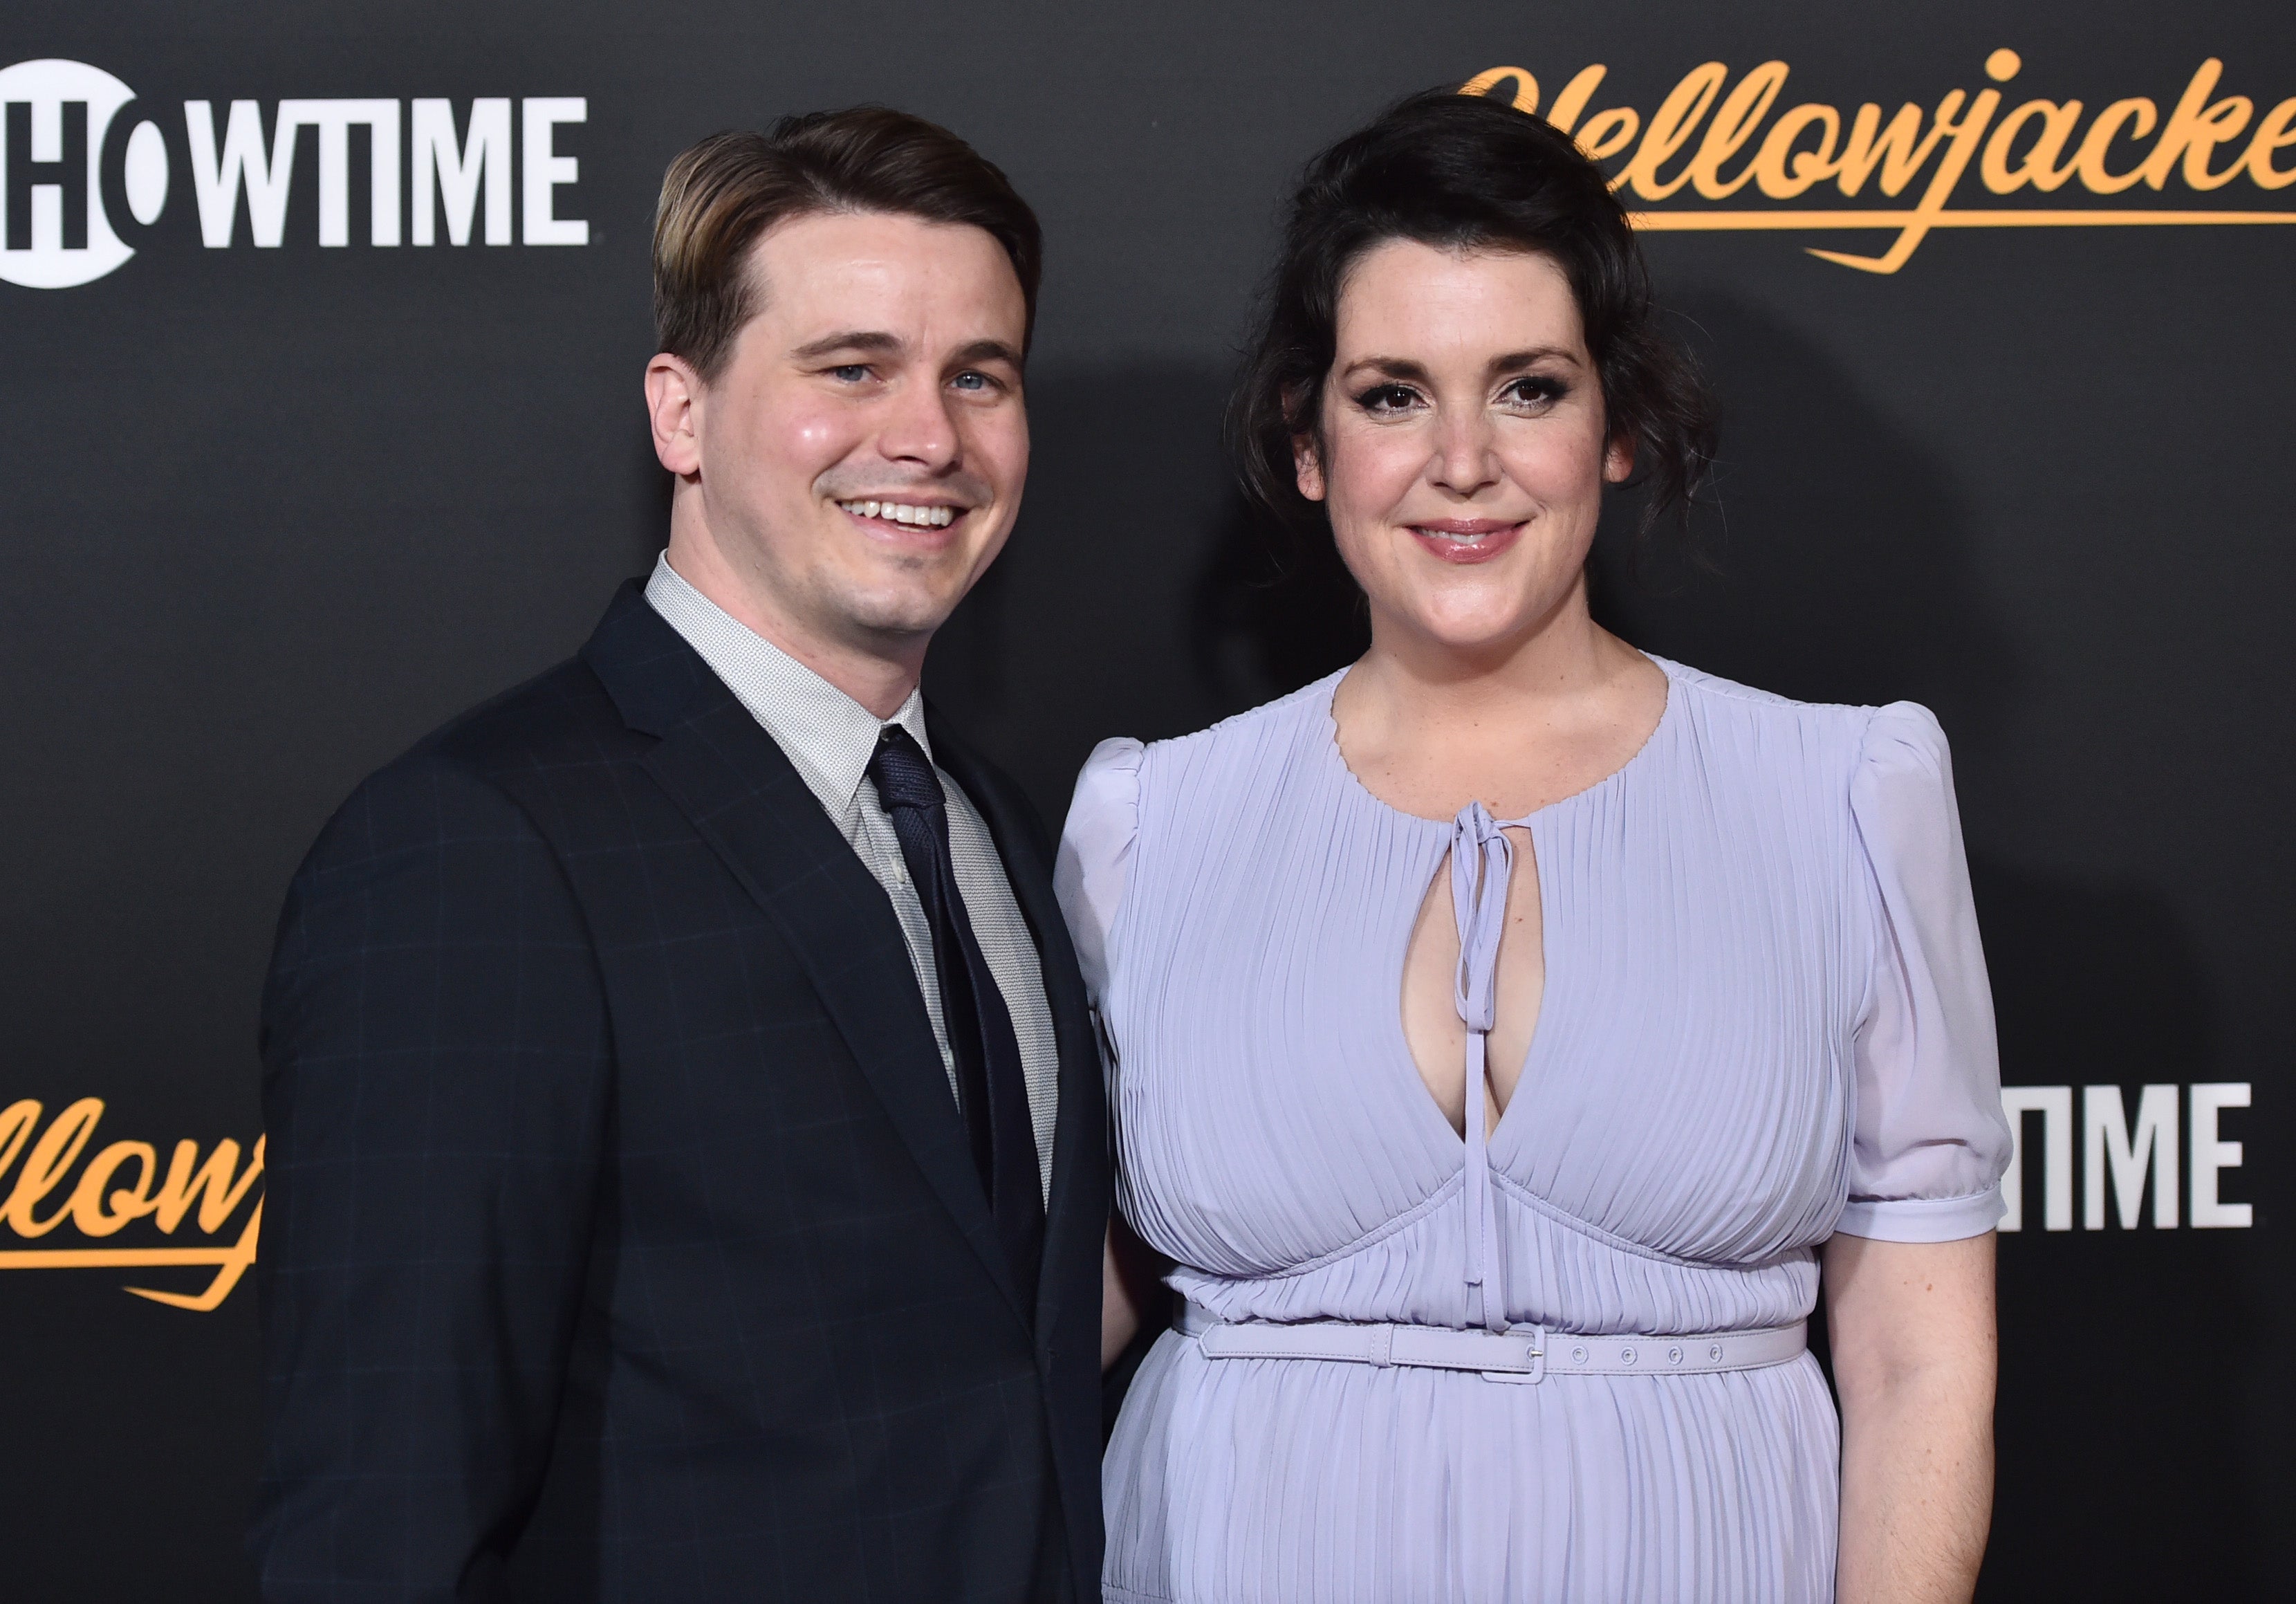 Jason Ritter defends wife Melanie Lynskey after she speaks out against body-shaming comments The Independent pic